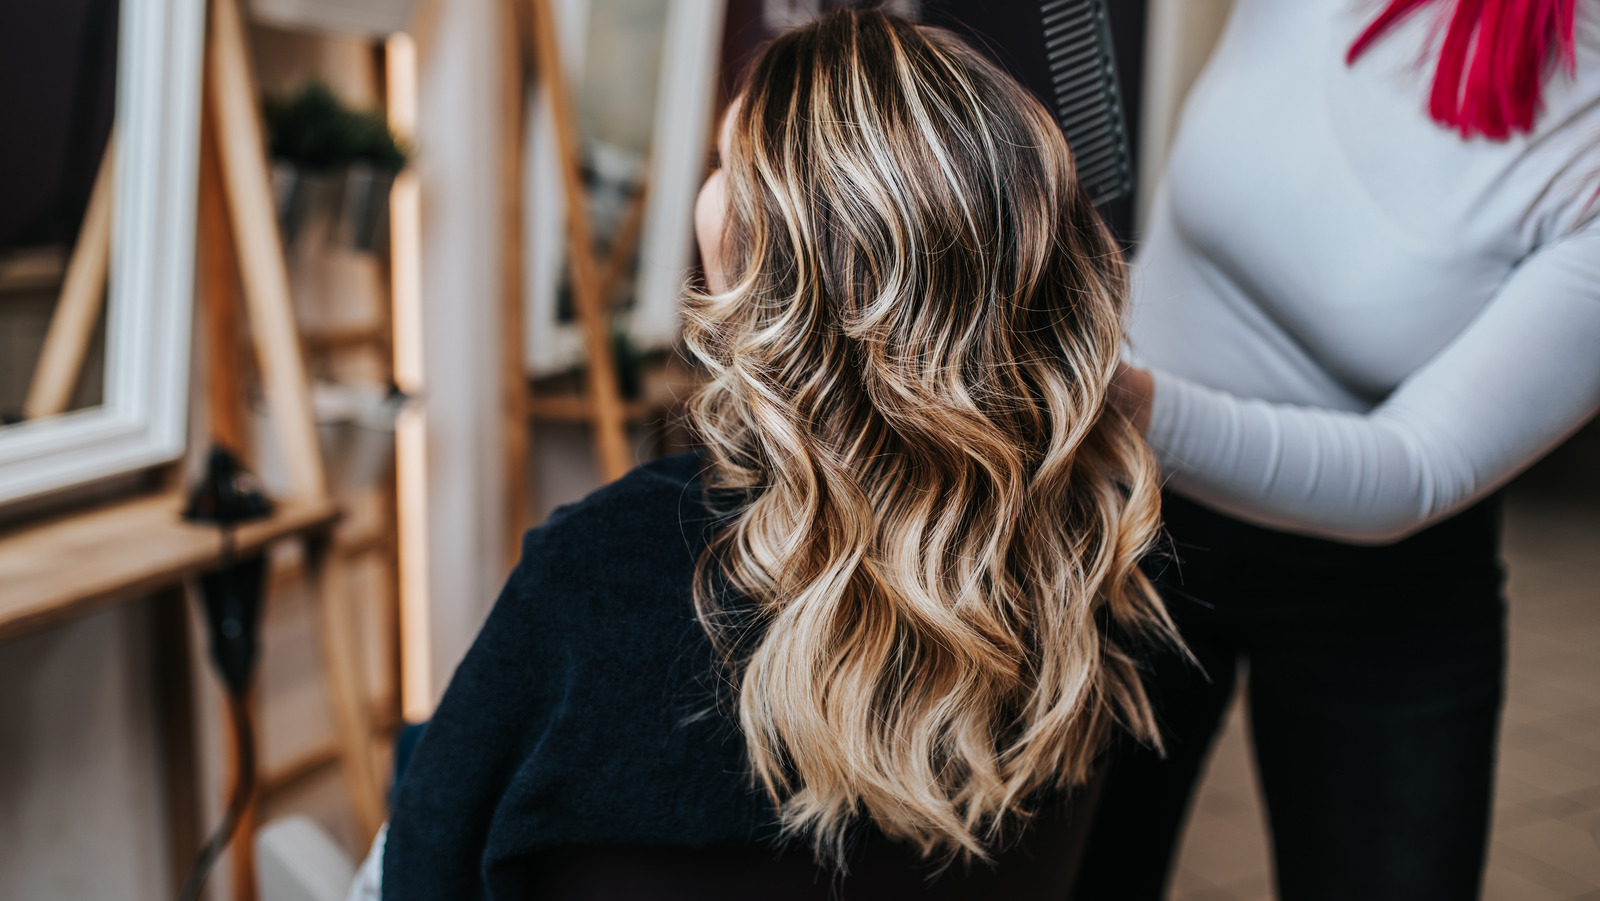 5 Ways To Get Rid Of Hair Highlights You're Over